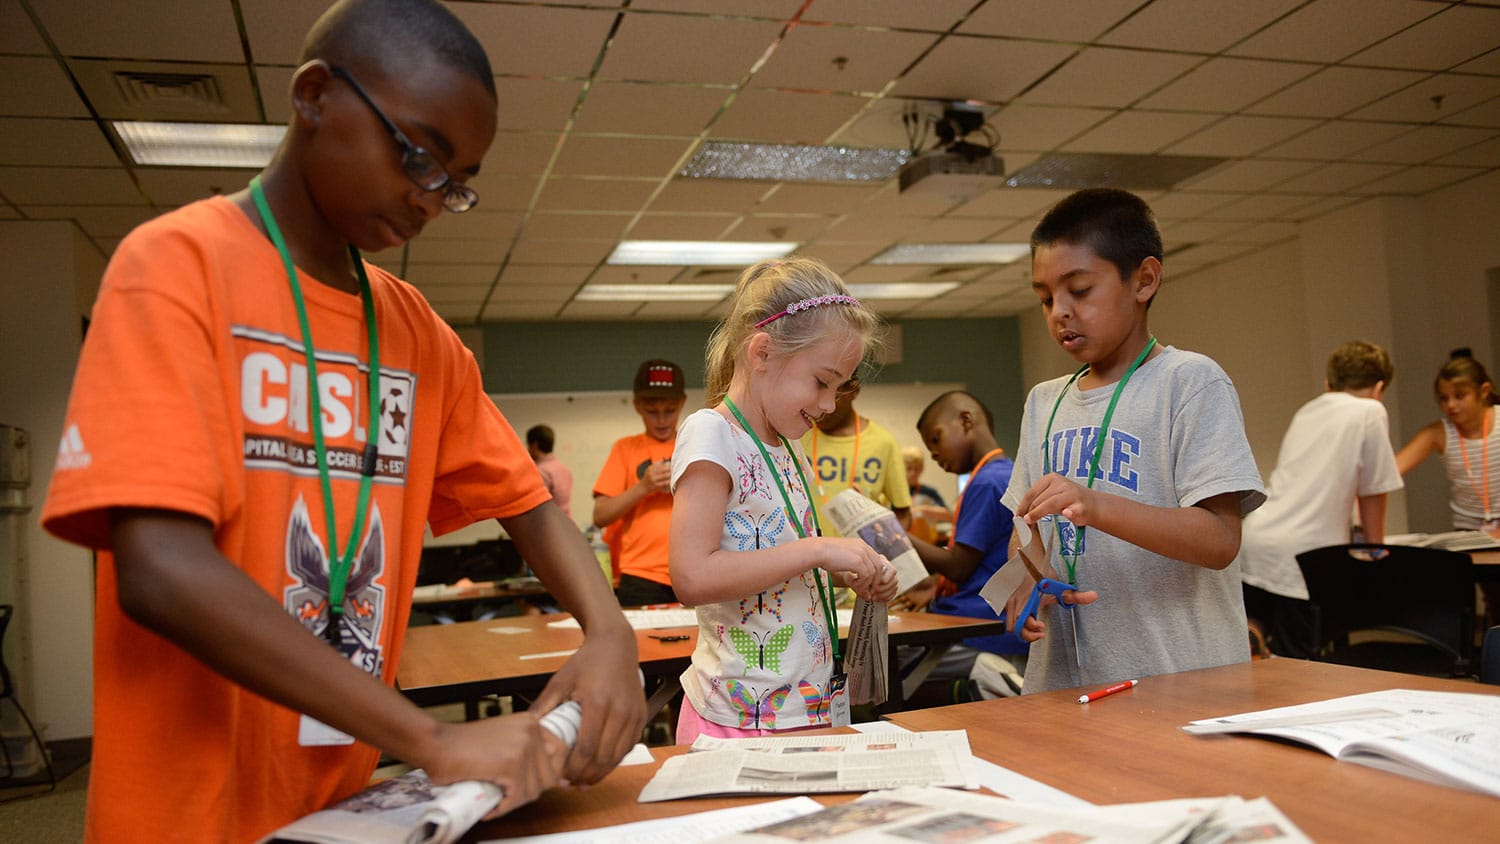 Elementary-age students take part in a hands-on engineering project during summer camp.